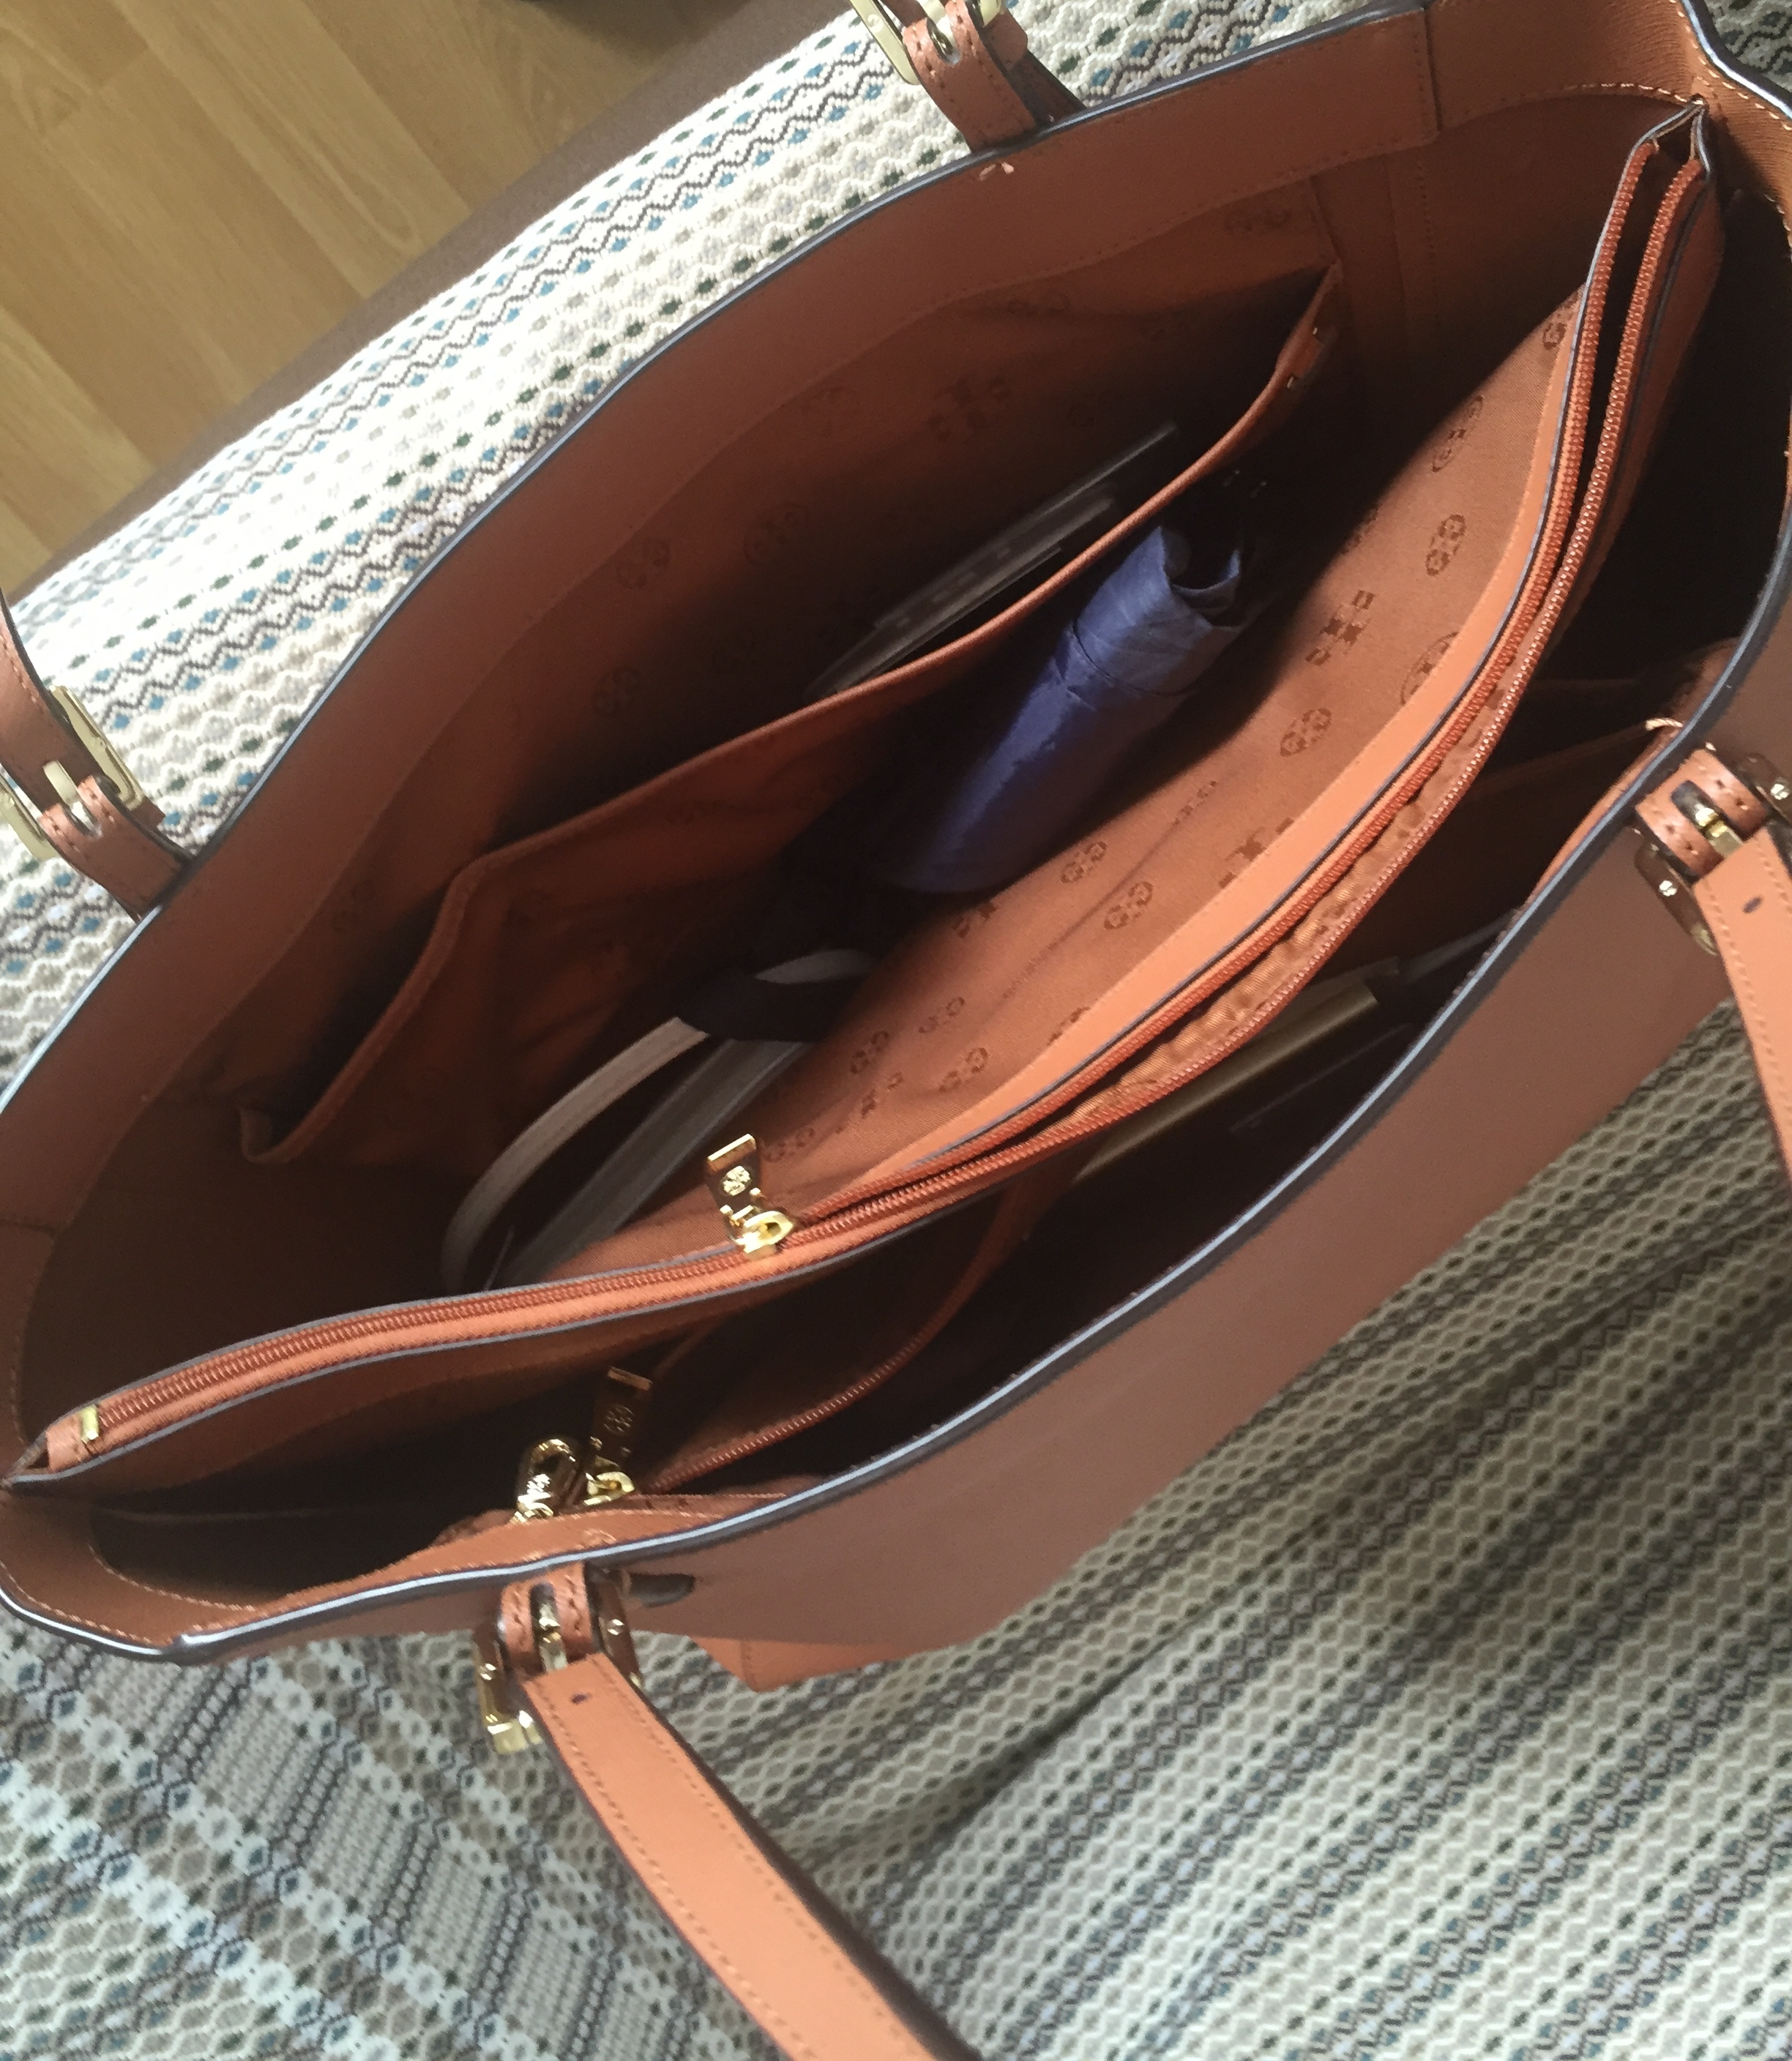 Tory Burch York Buckle Work Tote Review 